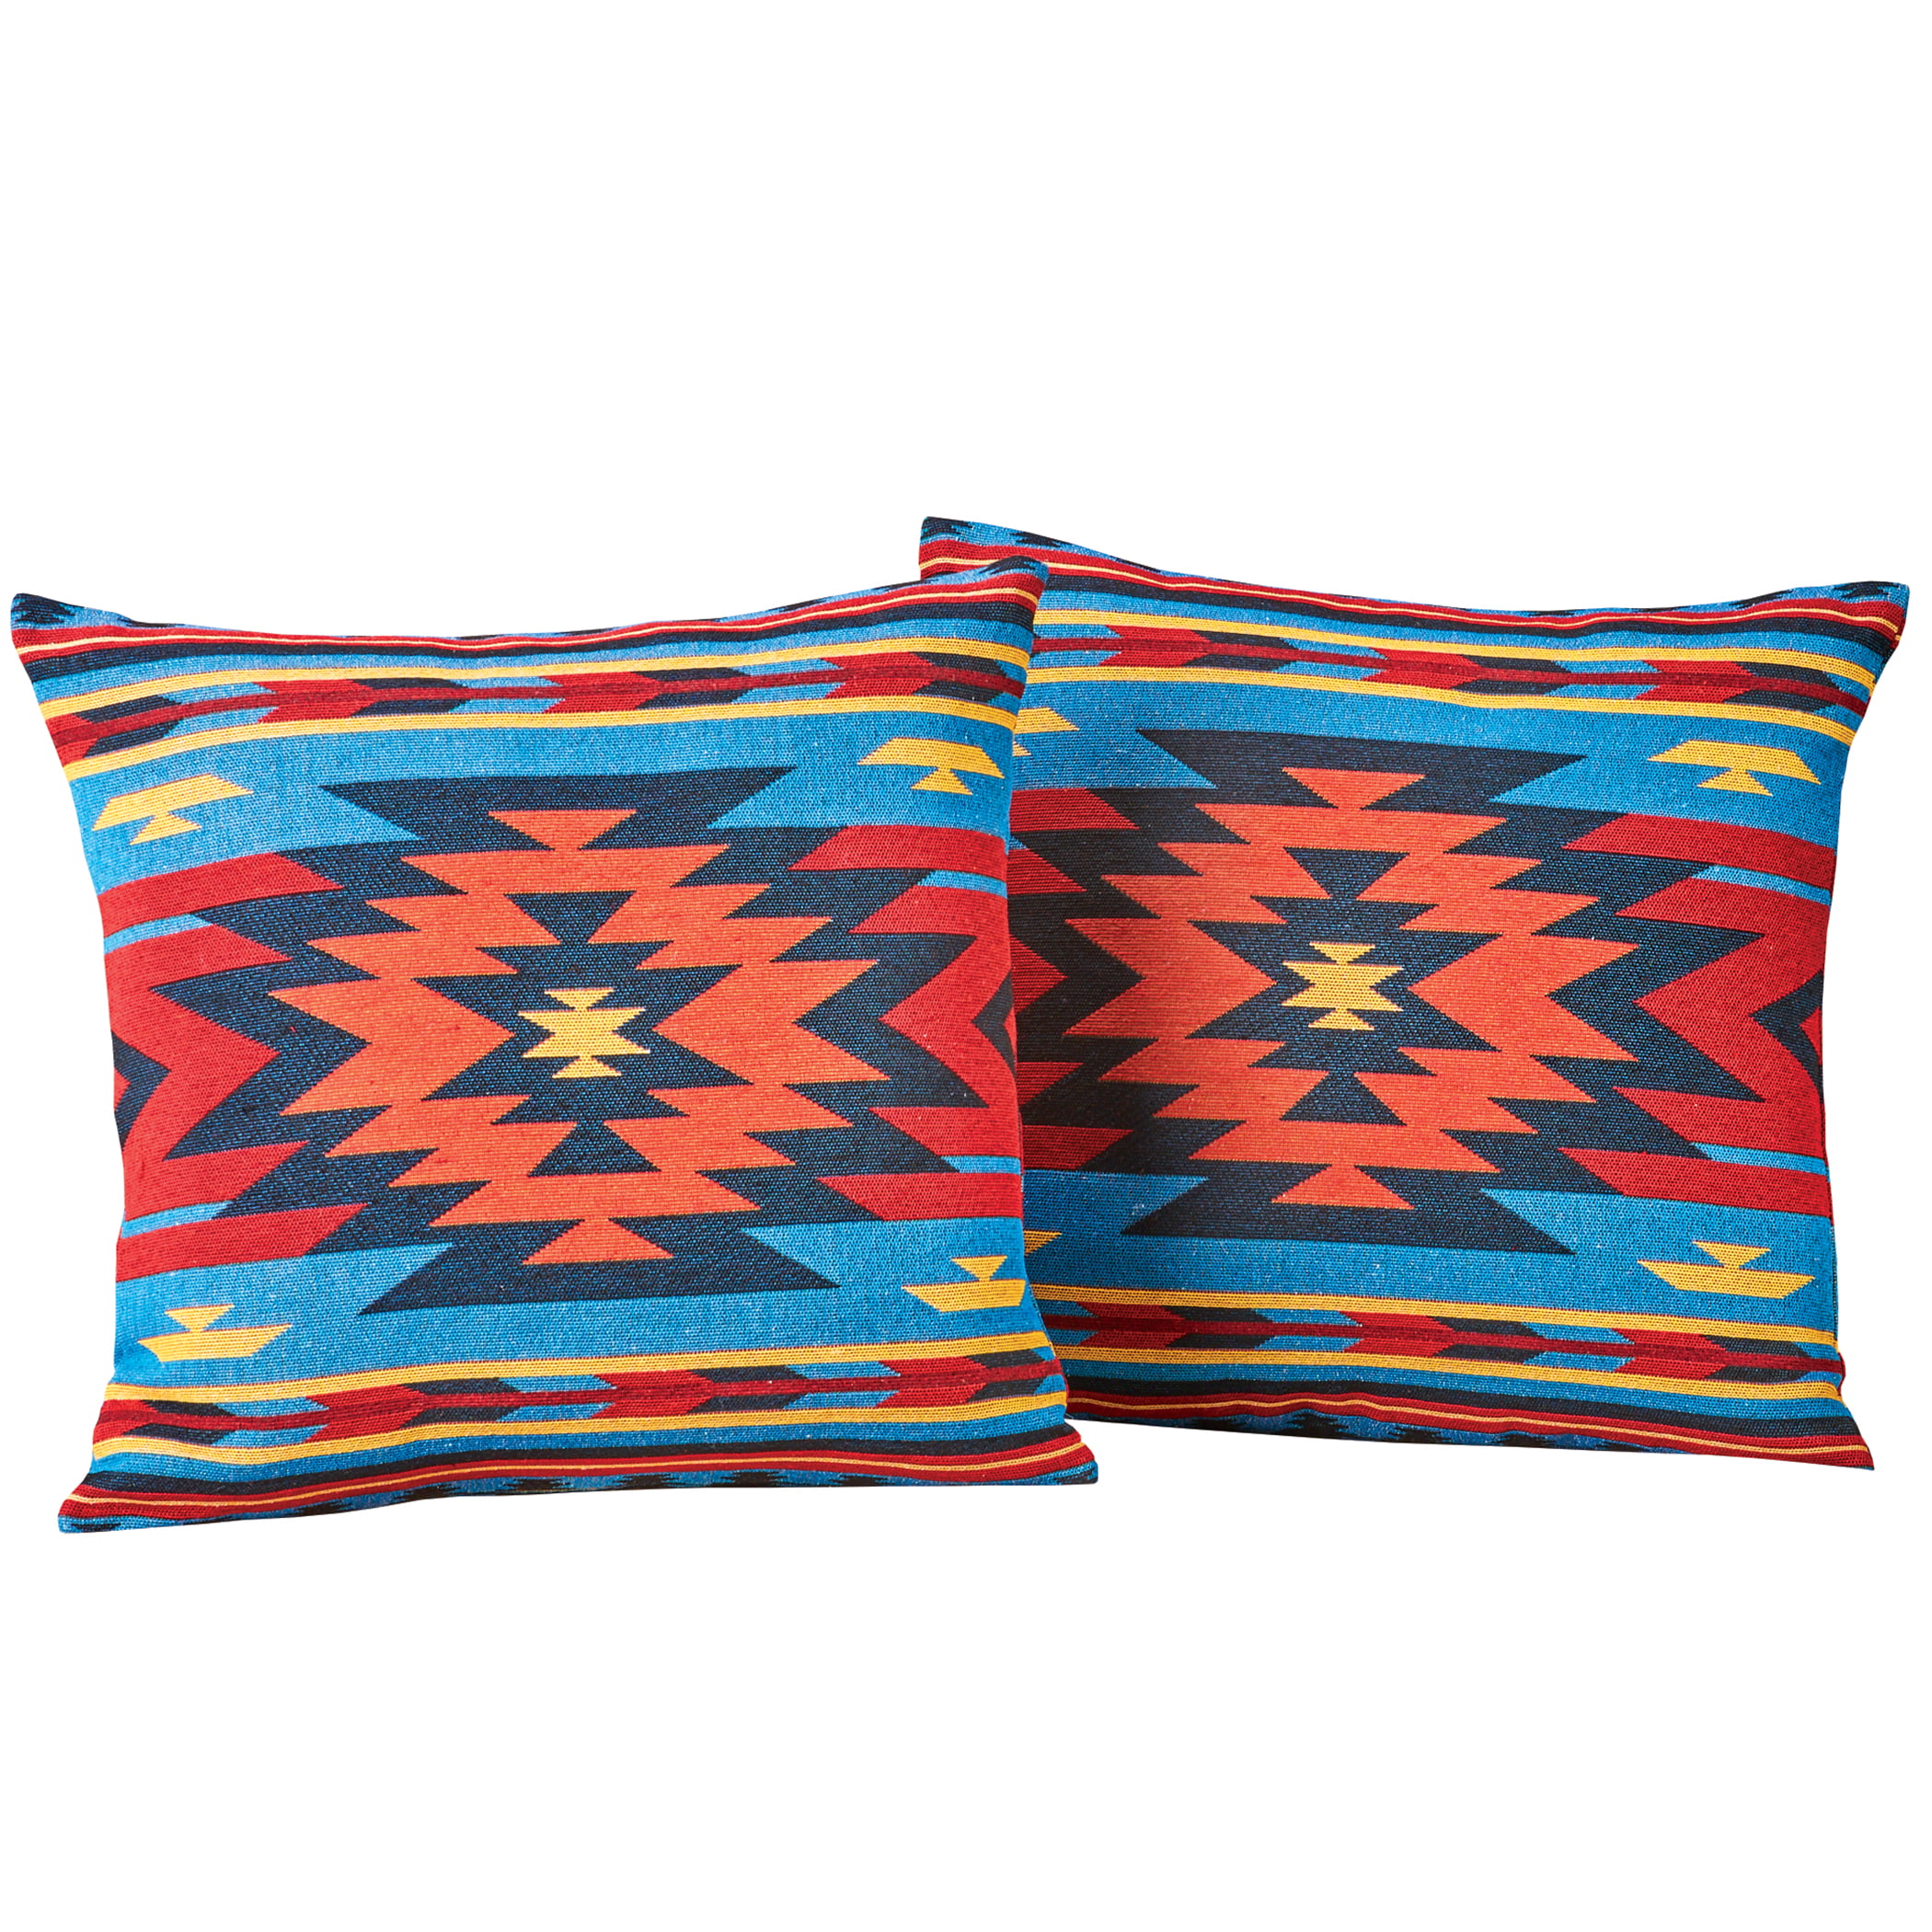 2PCS throw pillow case covers south-western Mexico Aztec cushion 